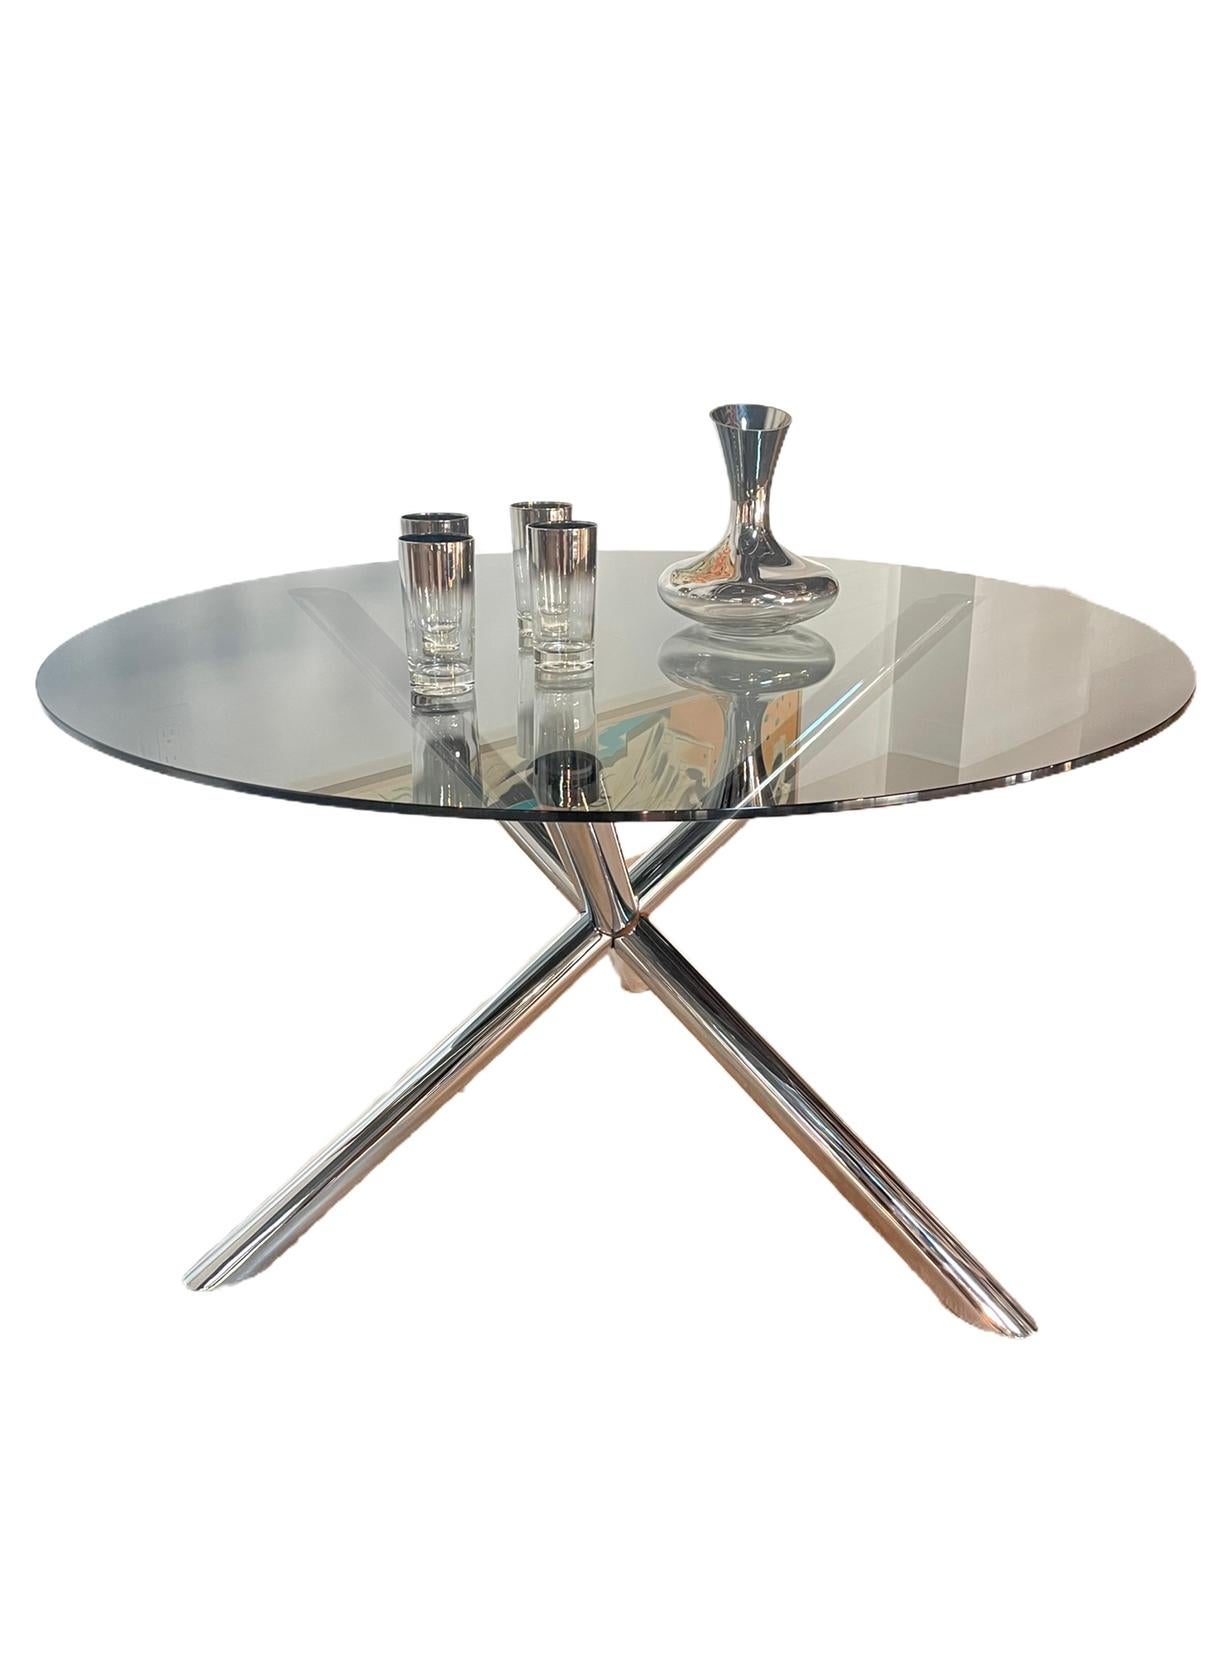 Italian Round Glass and Chromed Steel Dining Table, 1970s For Sale 1